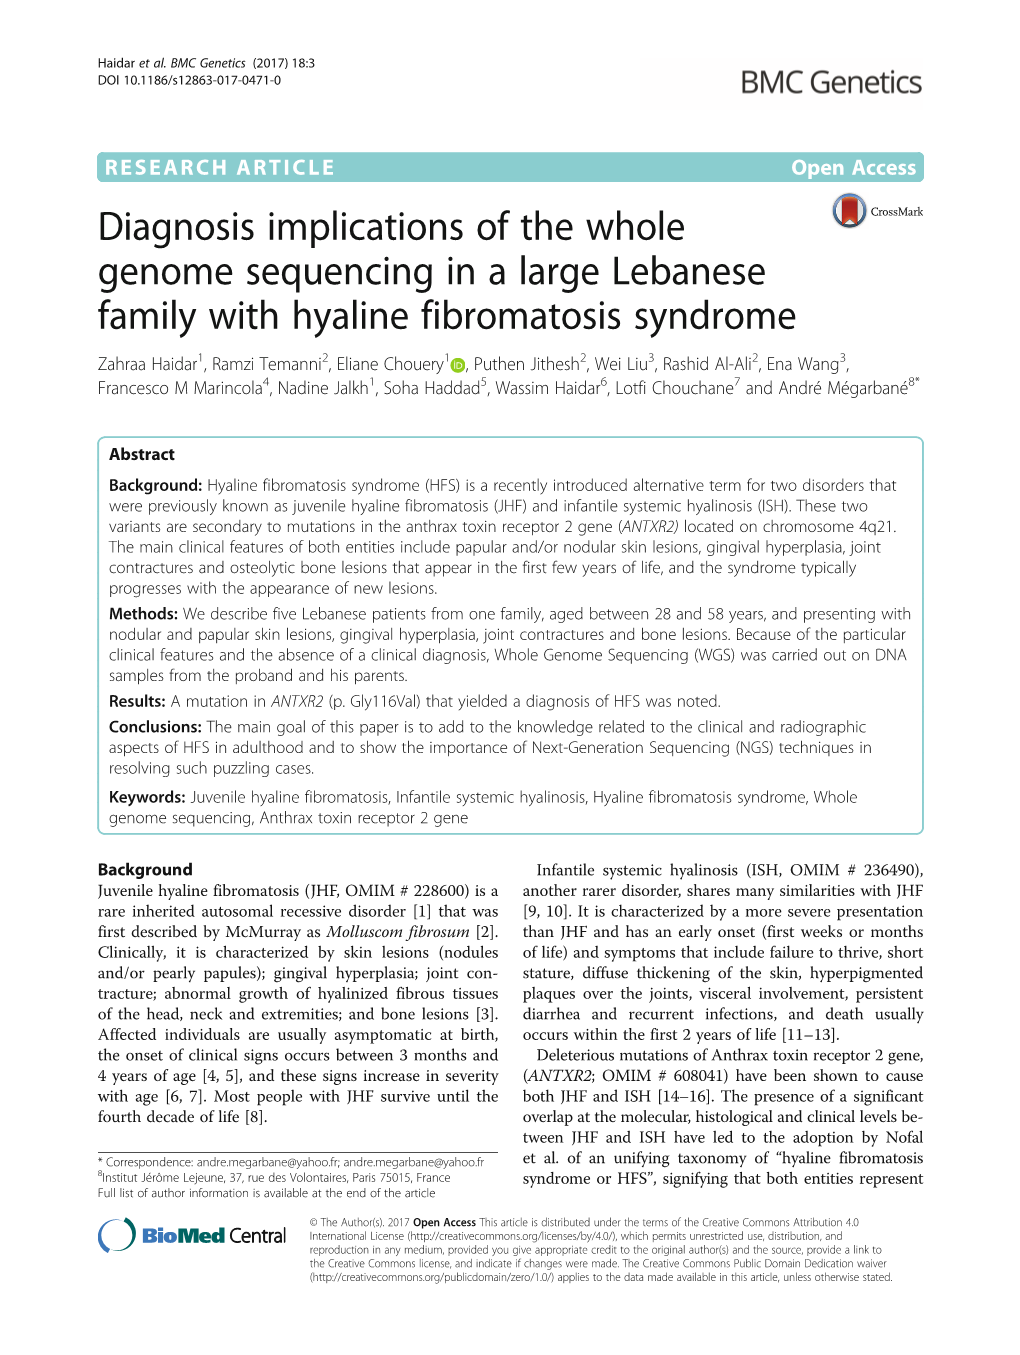 Diagnosis Implications of the Whole Genome Sequencing in a Large Lebanese Family with Hyaline Fibromatosis Syndrome